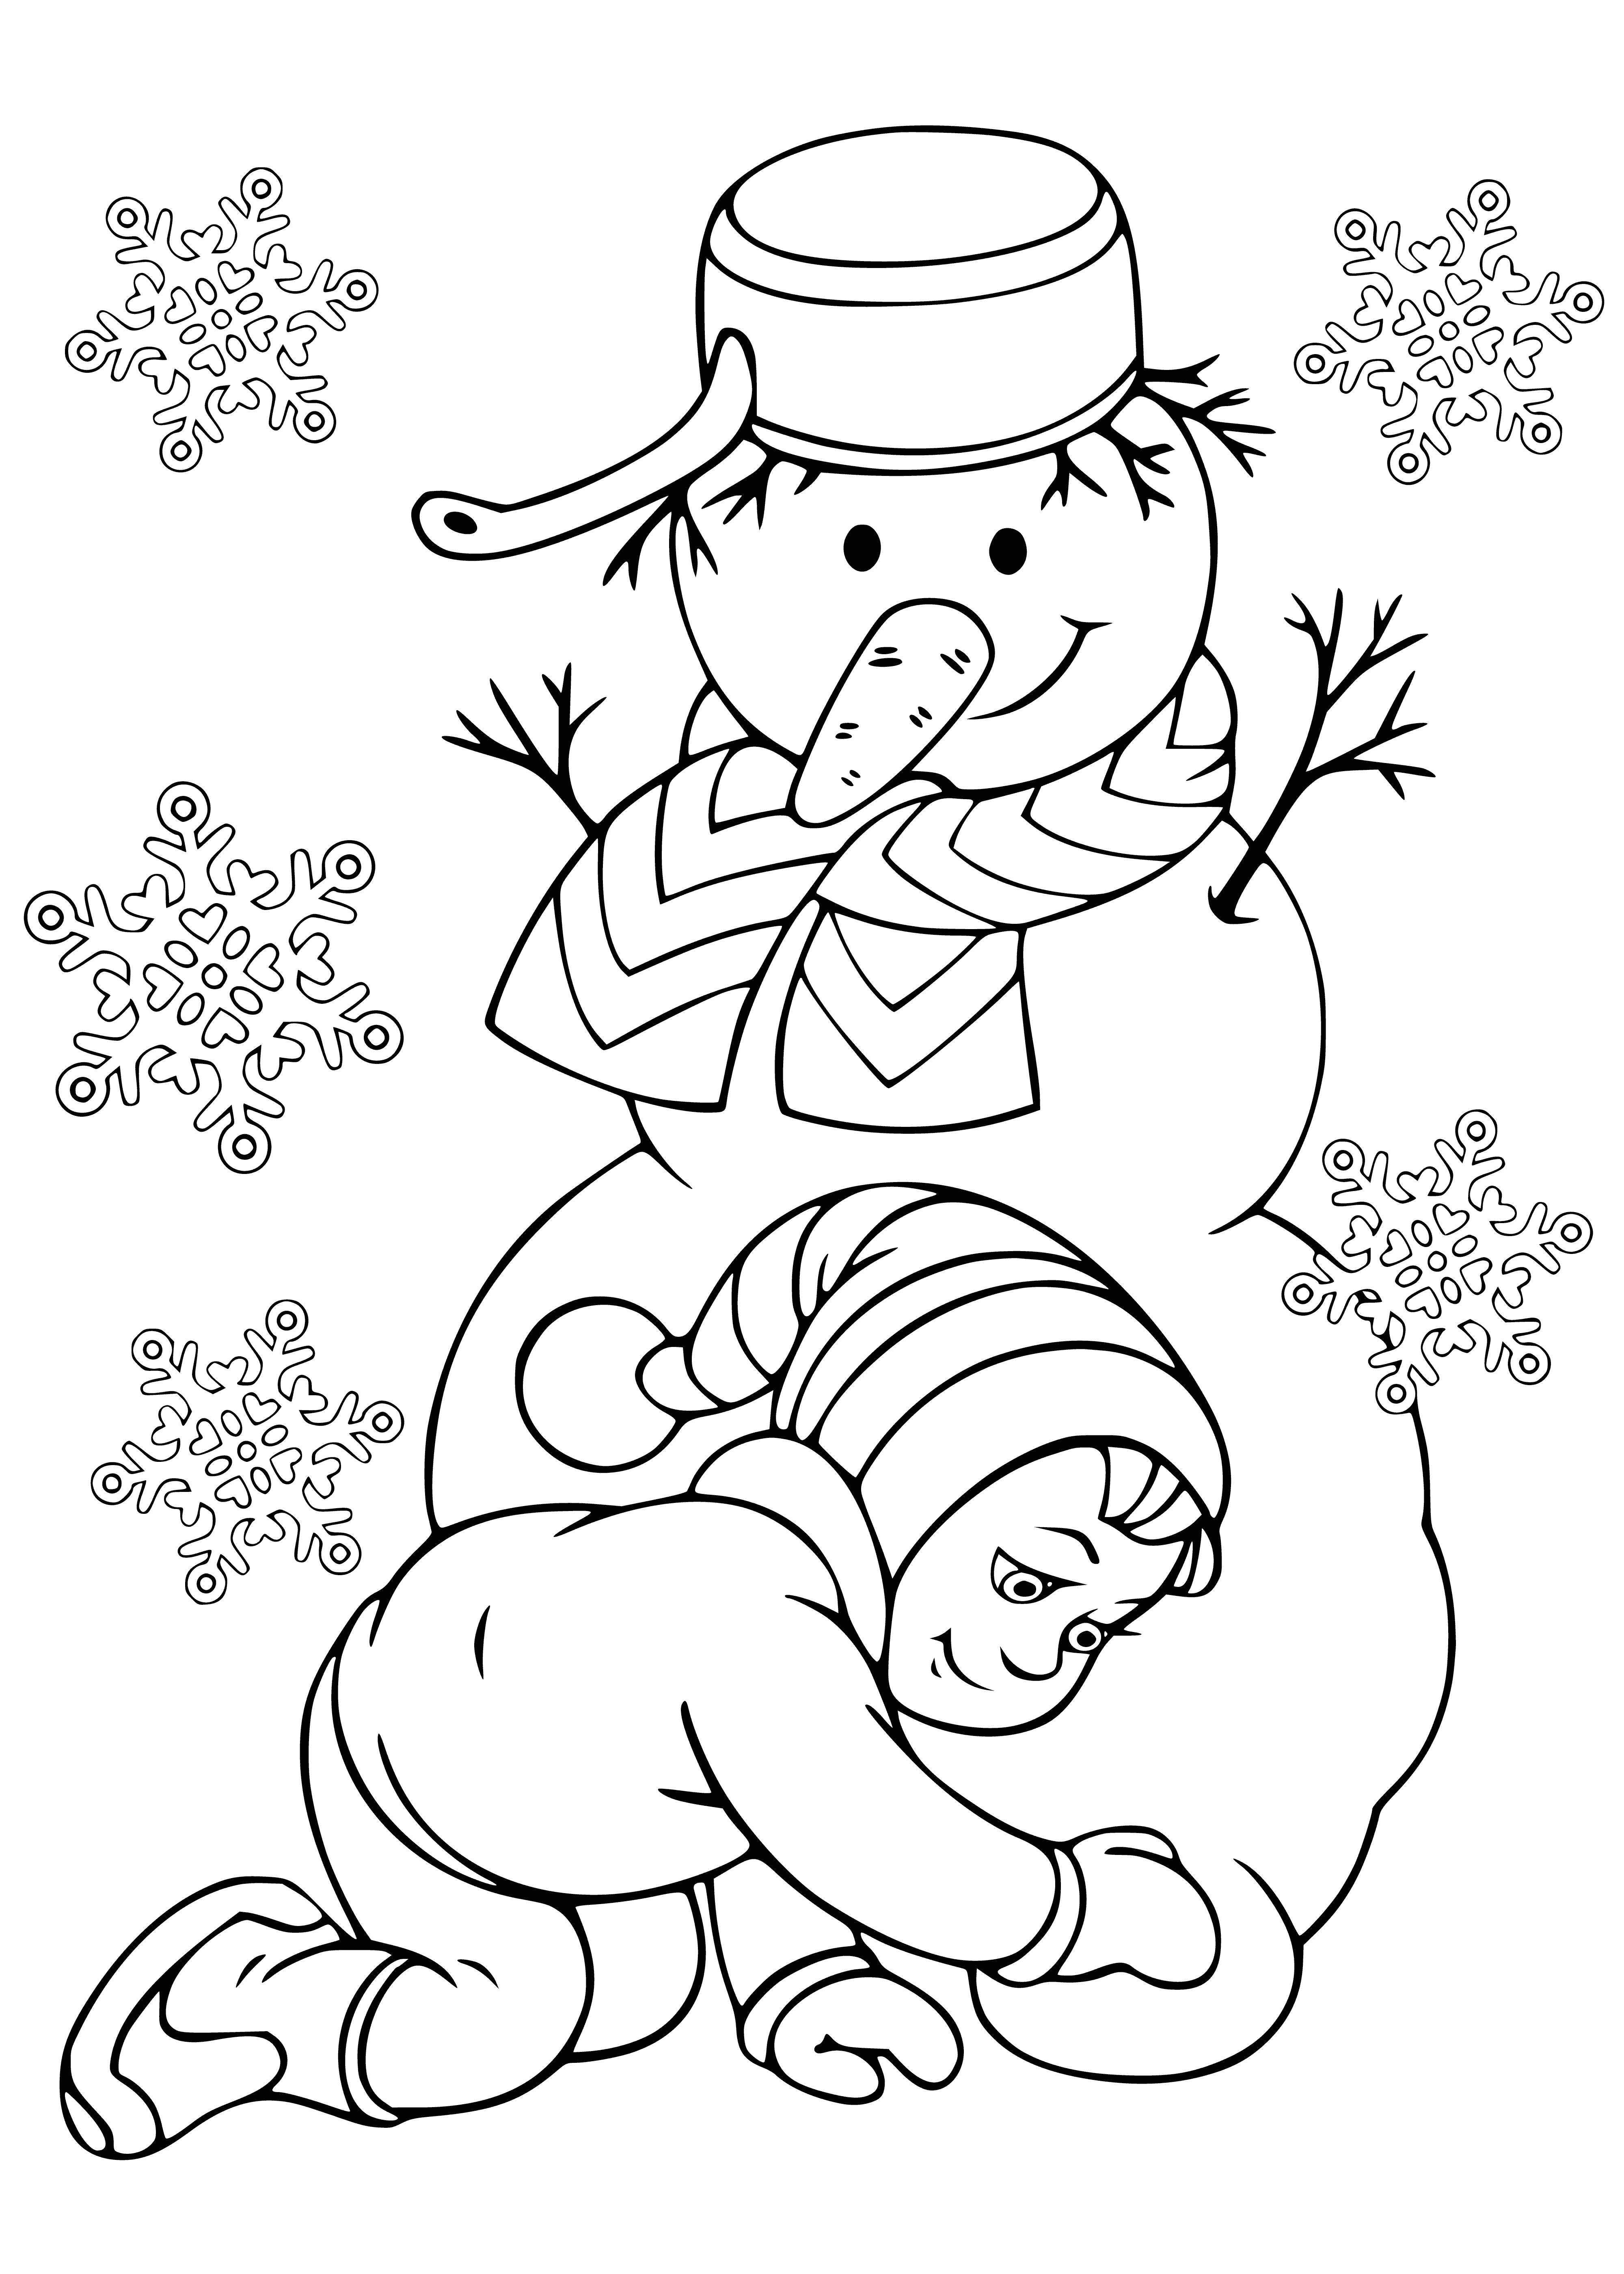 Girl builds a snowman outside on a cold day w/scarf, hat, gloves; carrot nose, black stones for eyes, twig arms, candy cane in left hand.